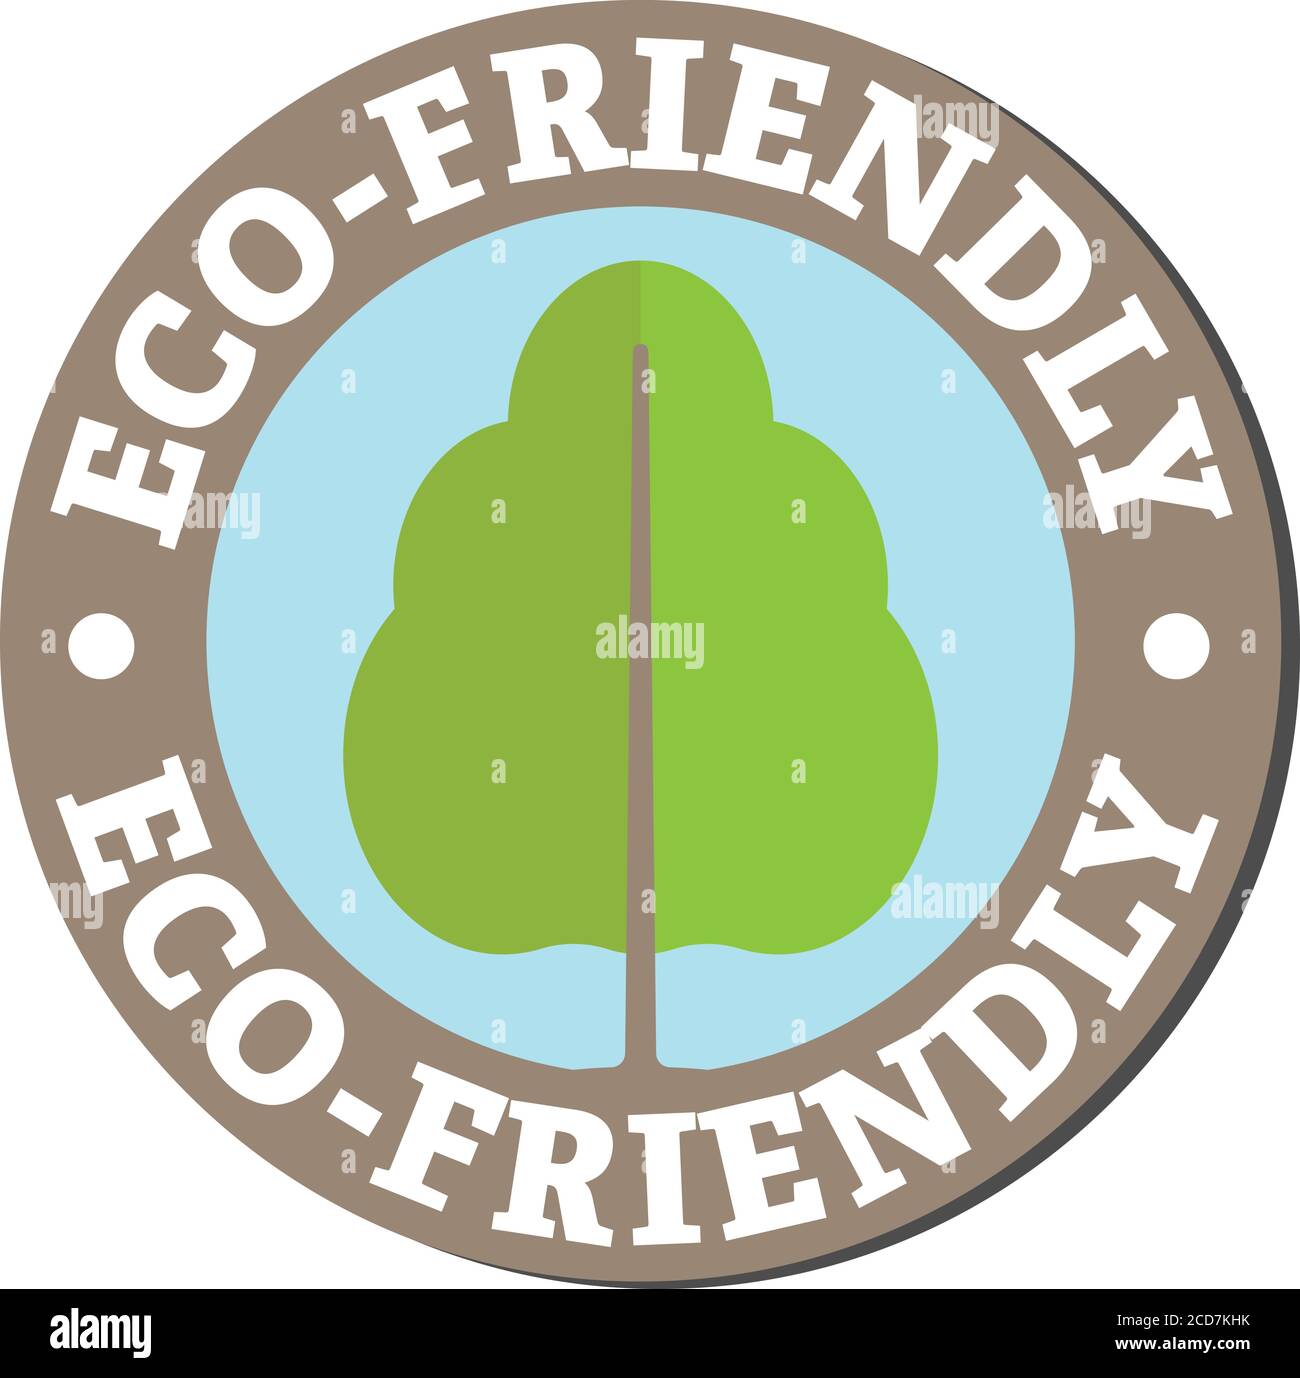 round eco-friendly sticker or label with tree symbol and text, vector illustration Stock Vector